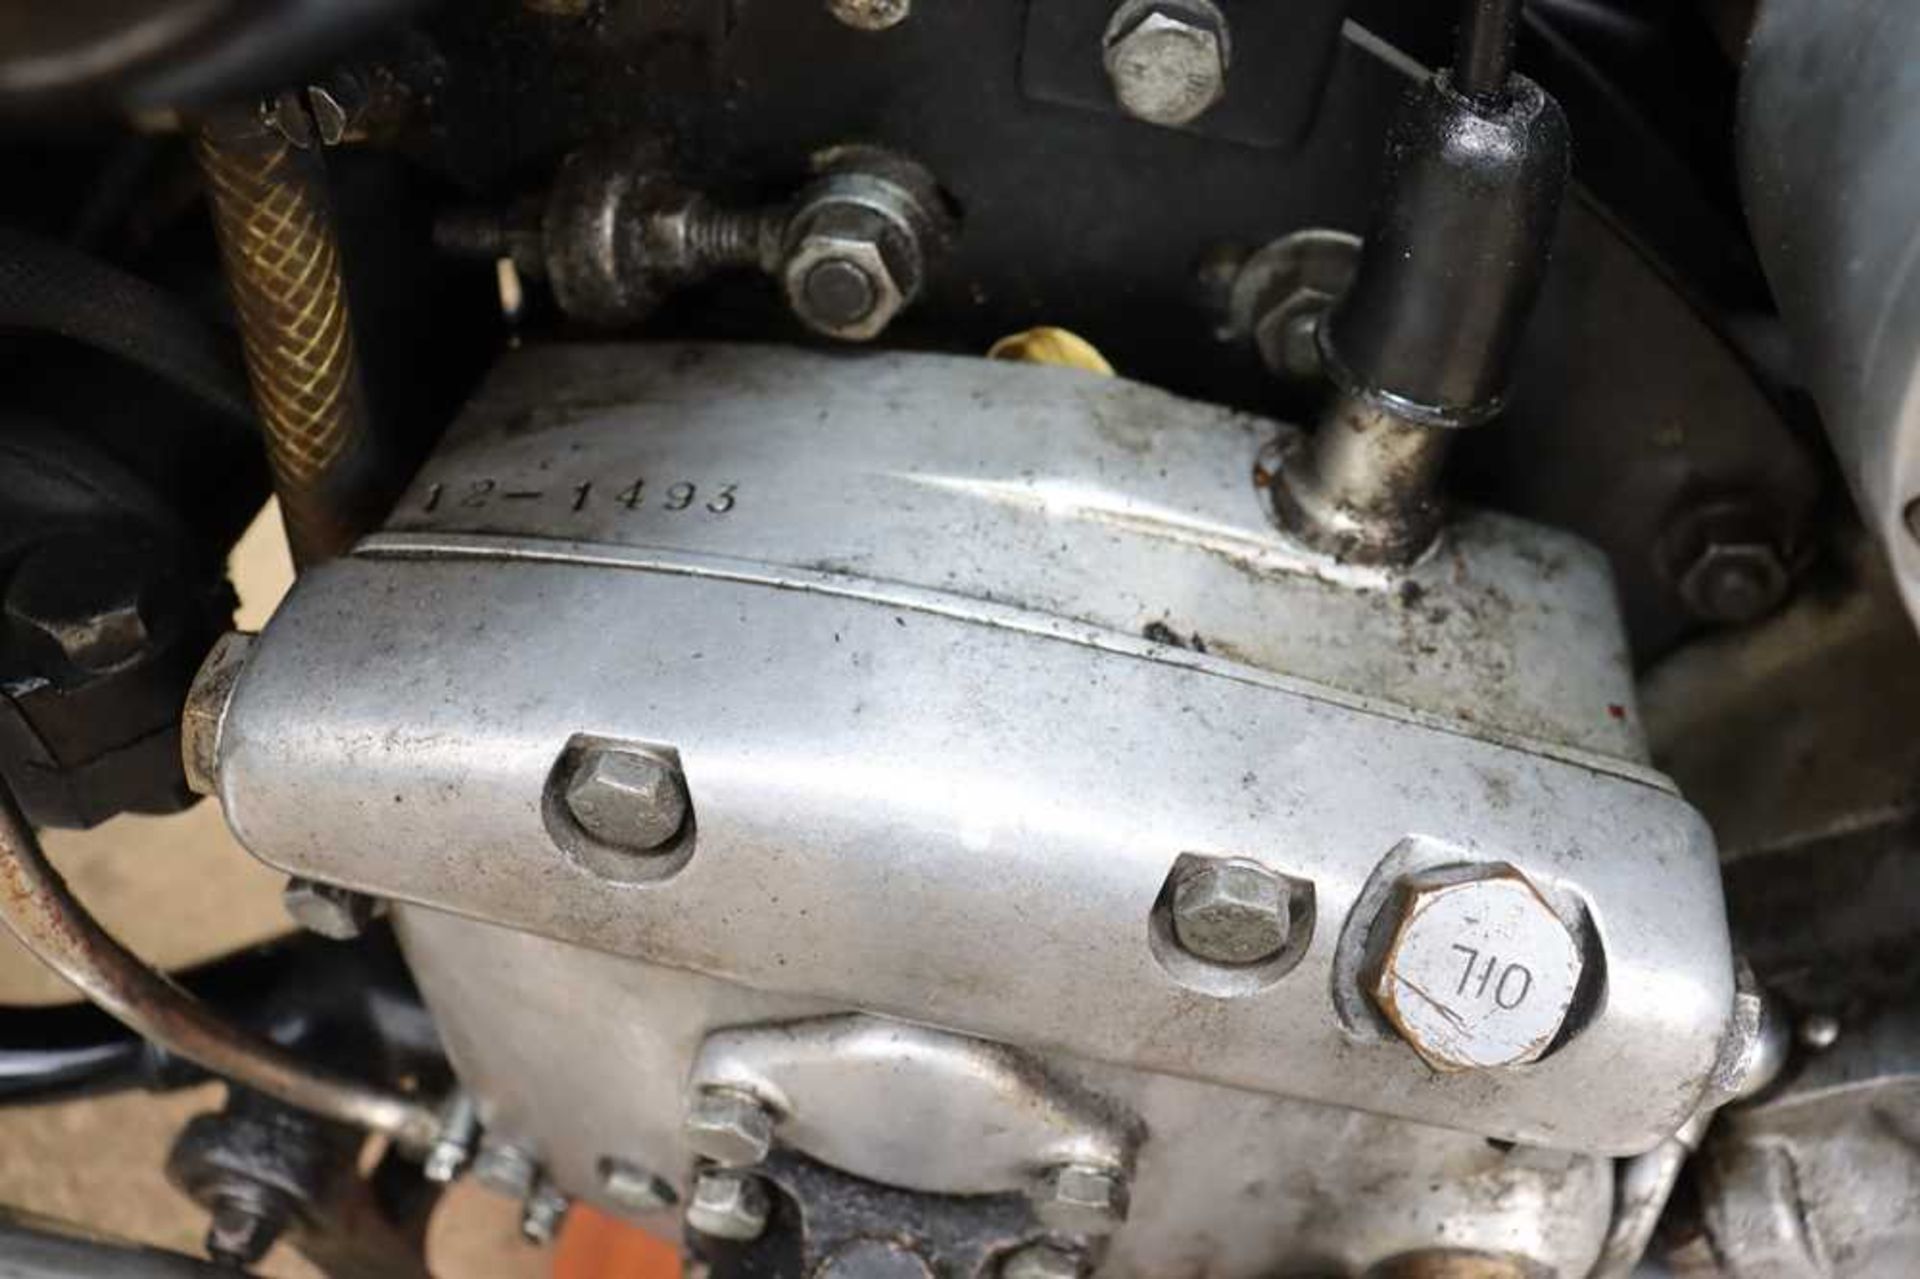 1954 Velocette MSS Fitted with an Alton electric starter kit - Image 32 of 41